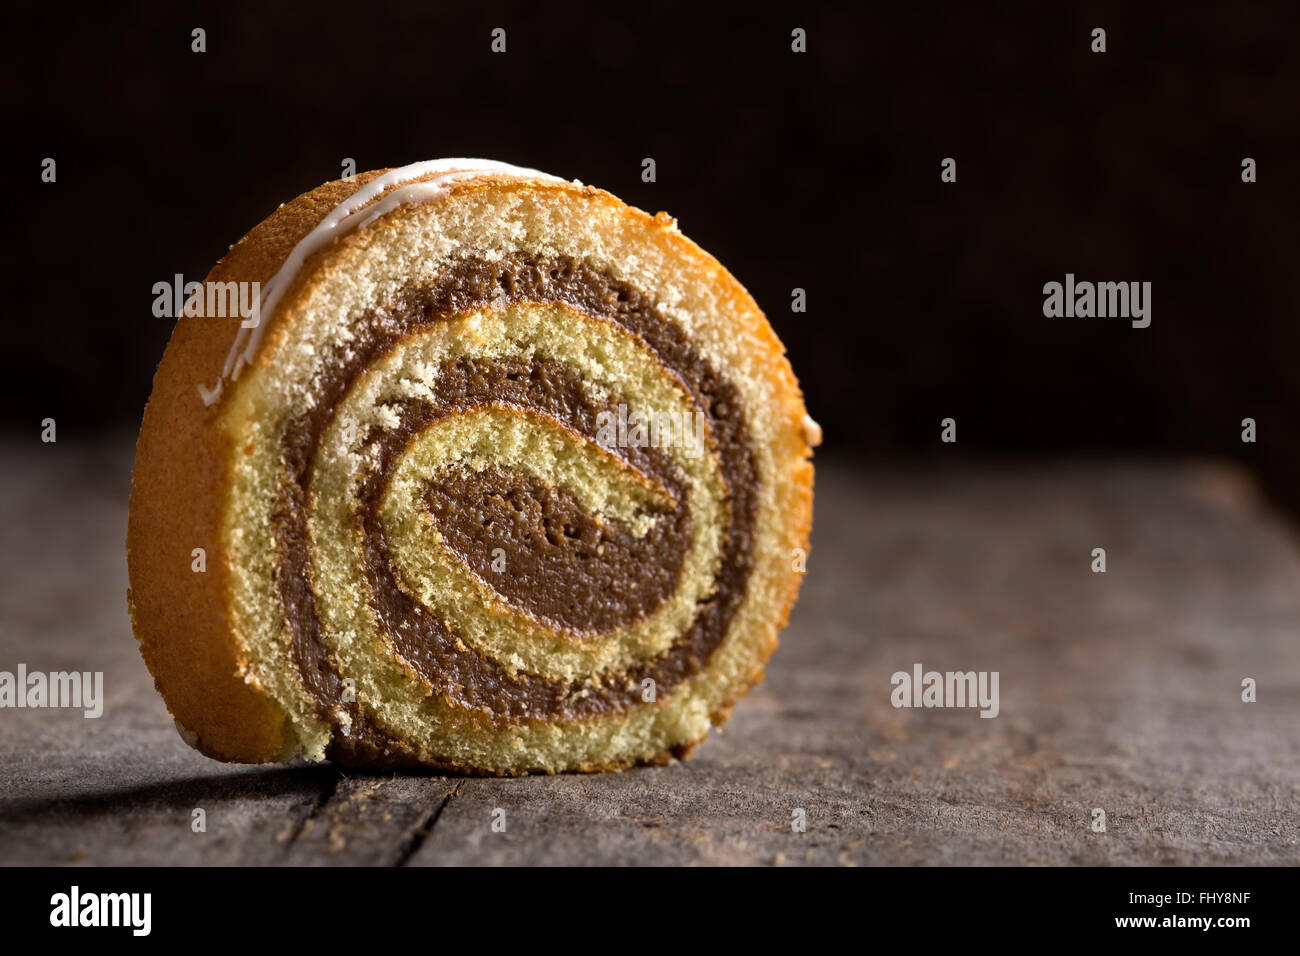 Chocolate roll cake with caramel and vanilla sauce over wooden background Stock Photo